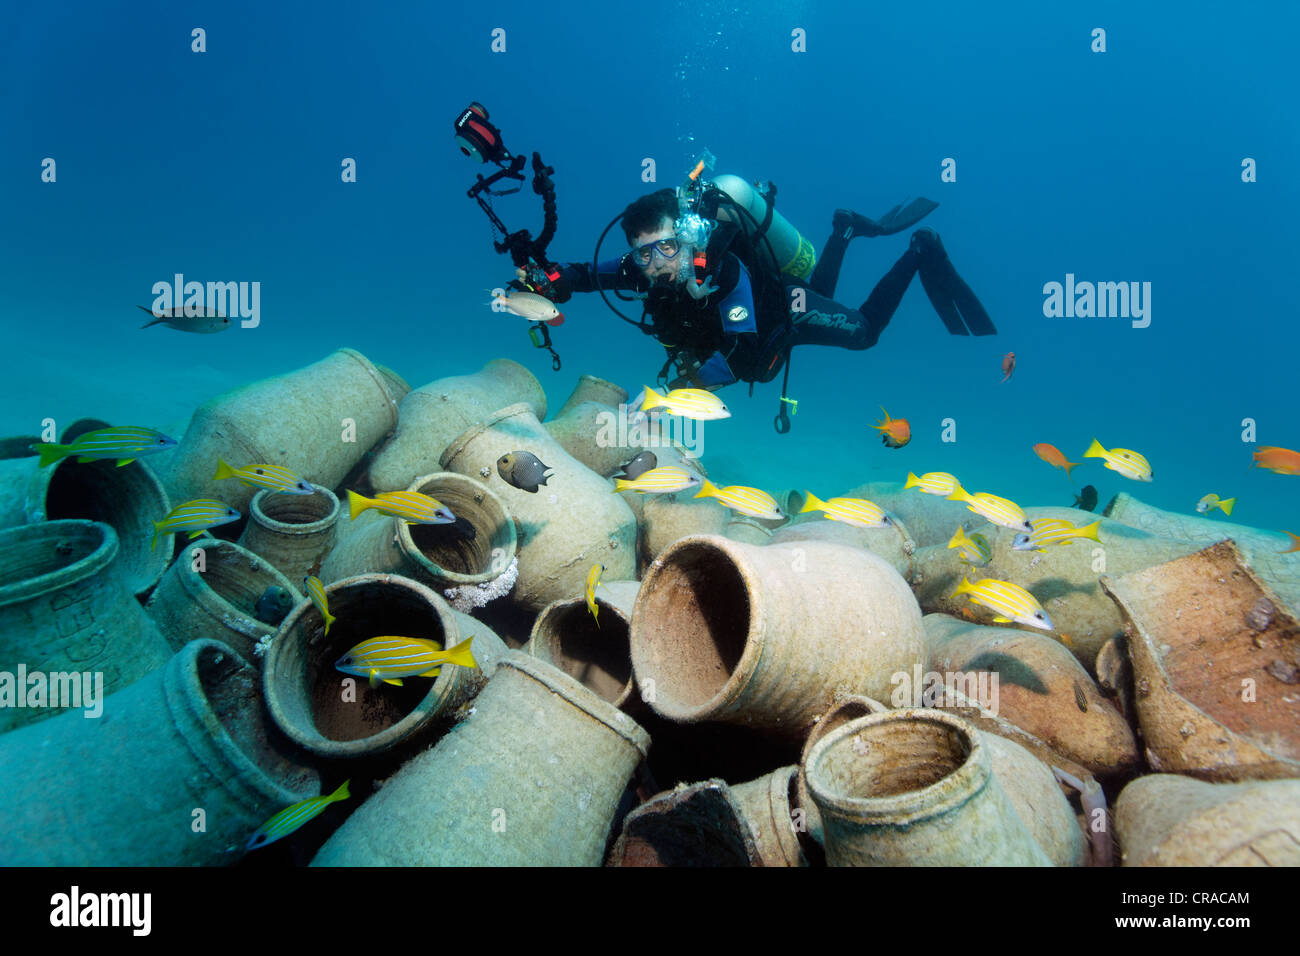 Diver with underwater camera looking at amphoras and fishes, Makadi Bay, Hurghada, Egypt, Red Sea, Africa Stock Photo